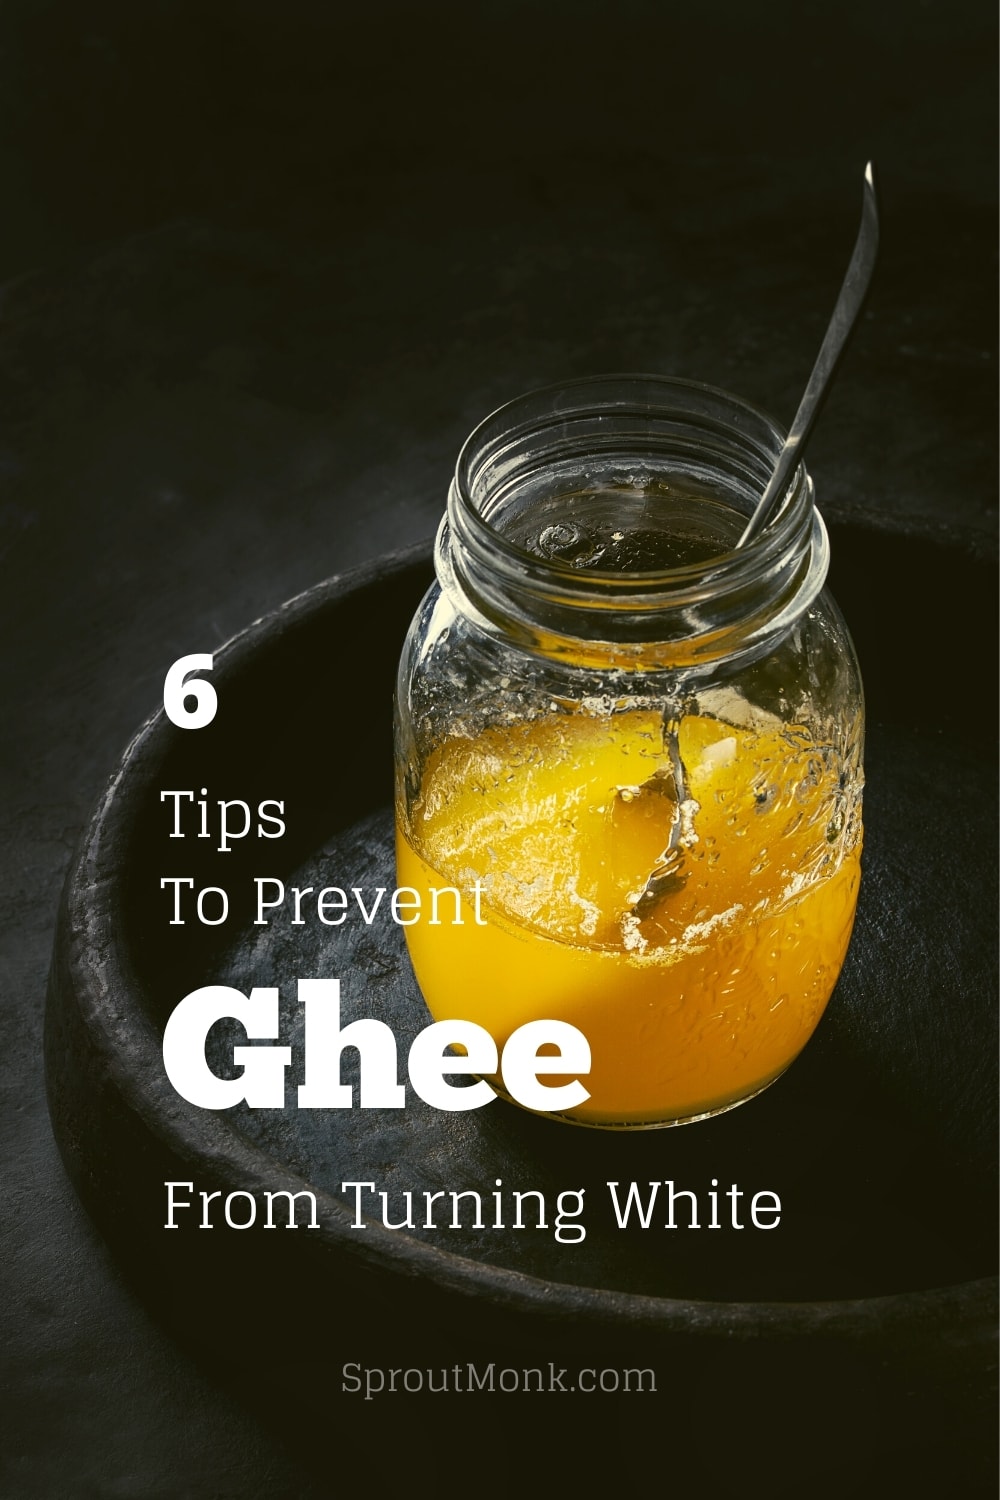 6 Tips To Prevent Ghee From Turning White - Sprout Monk